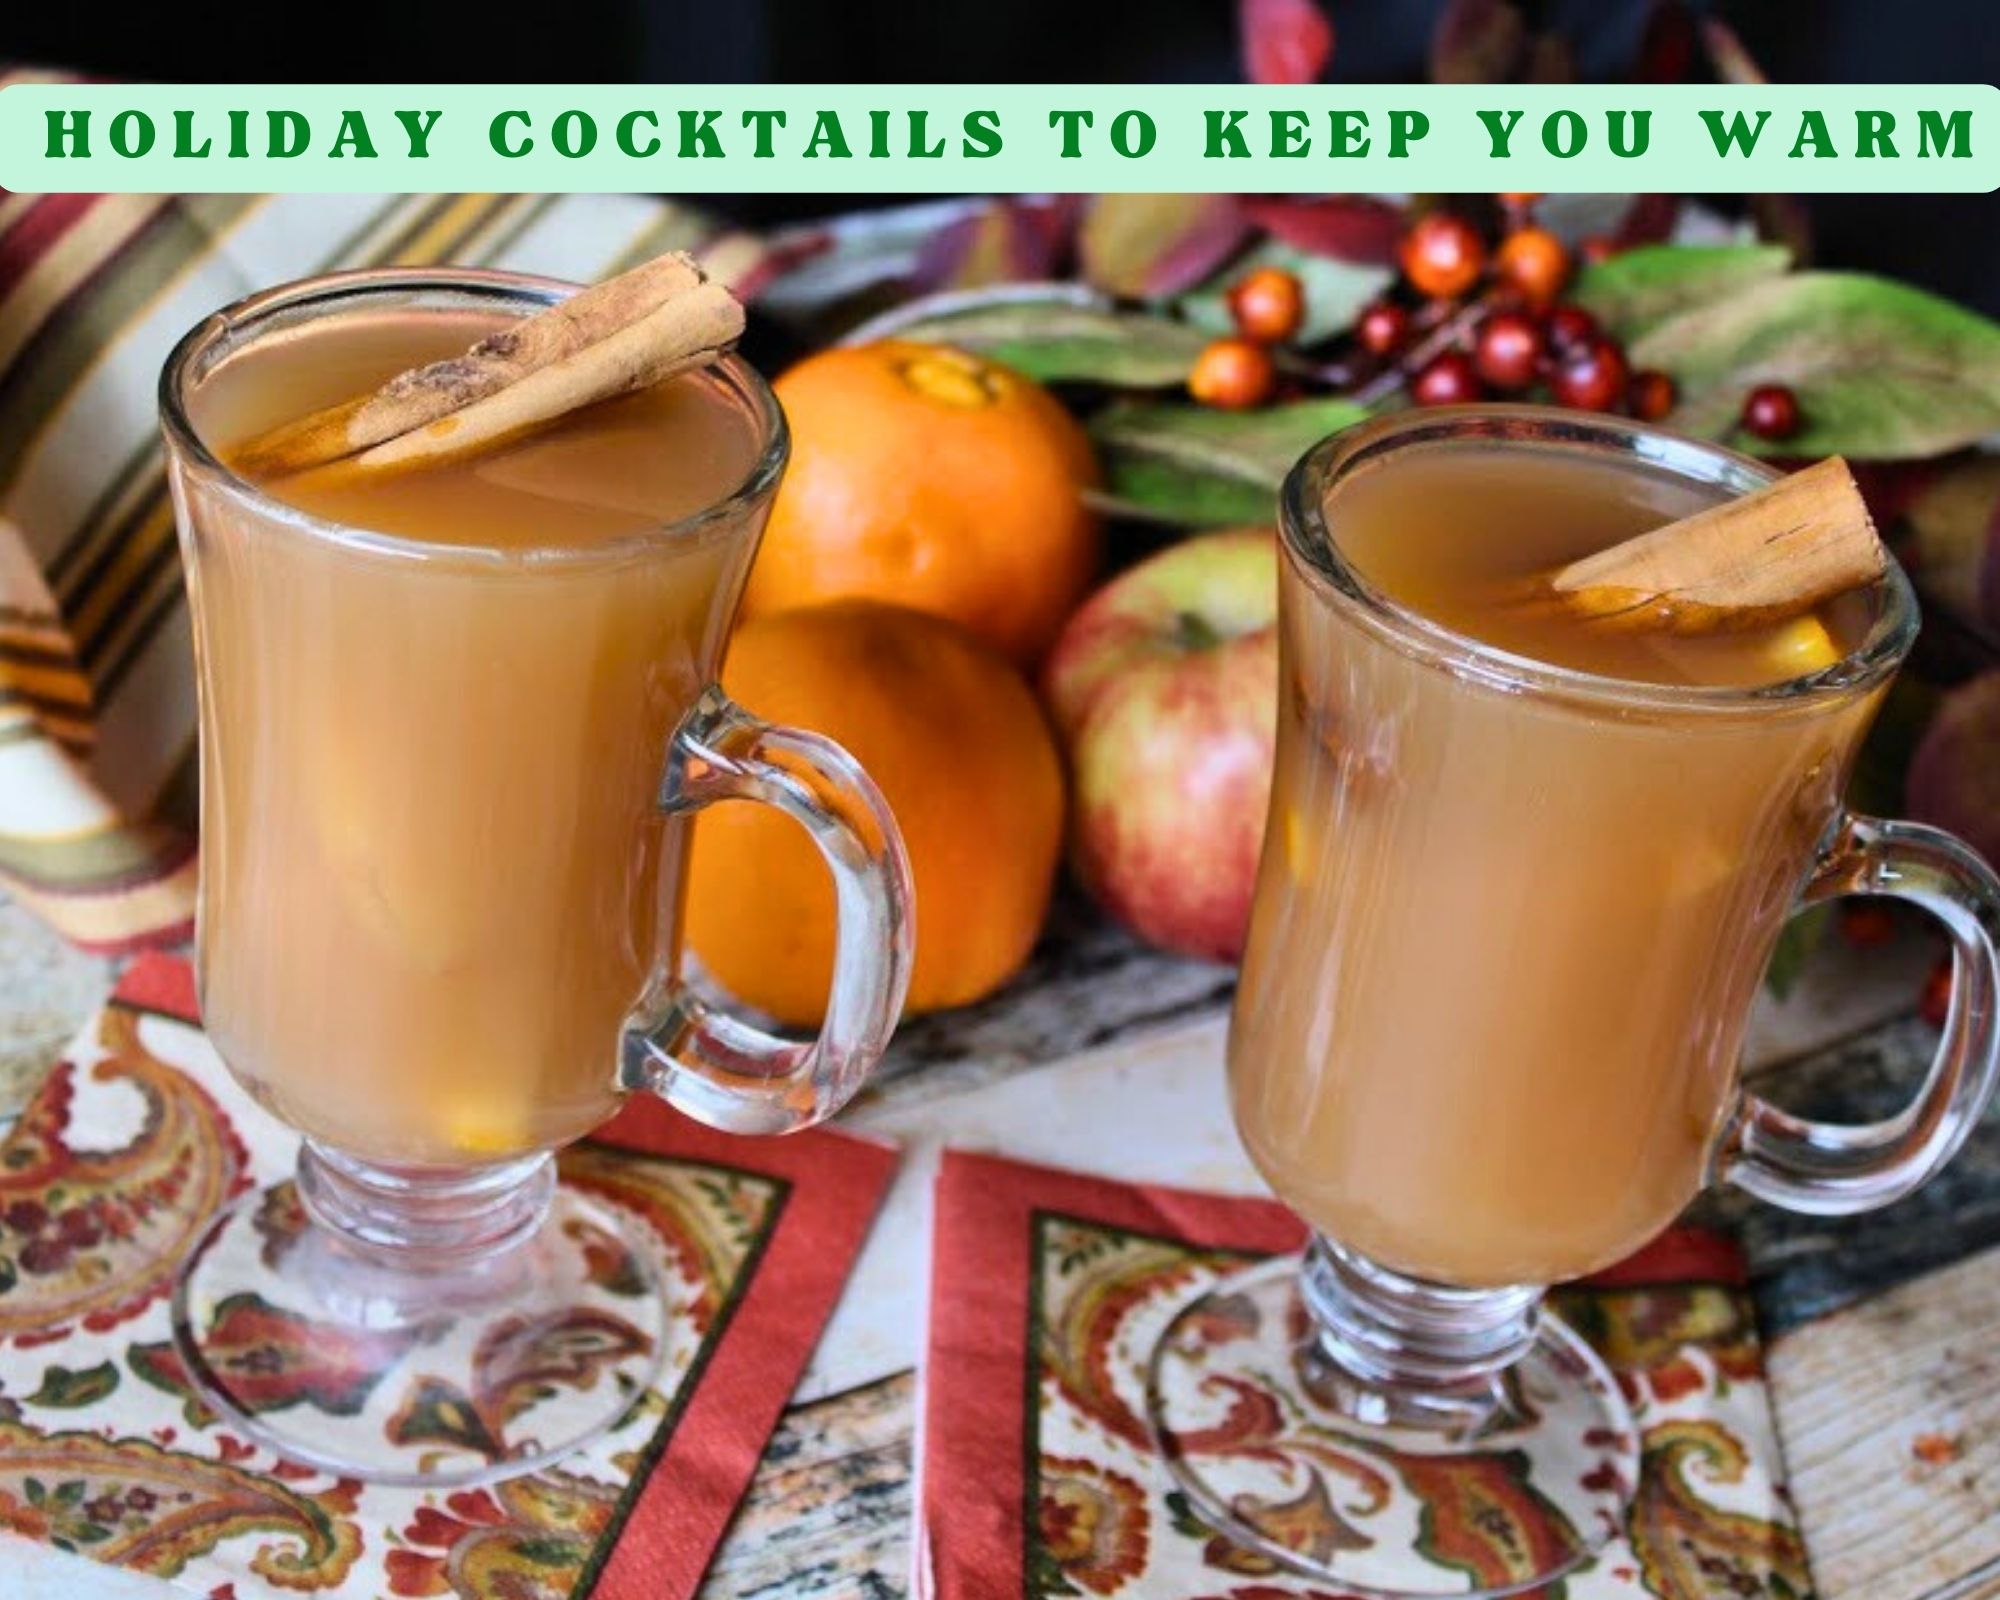 Holiday Cocktails to Keep You Warm